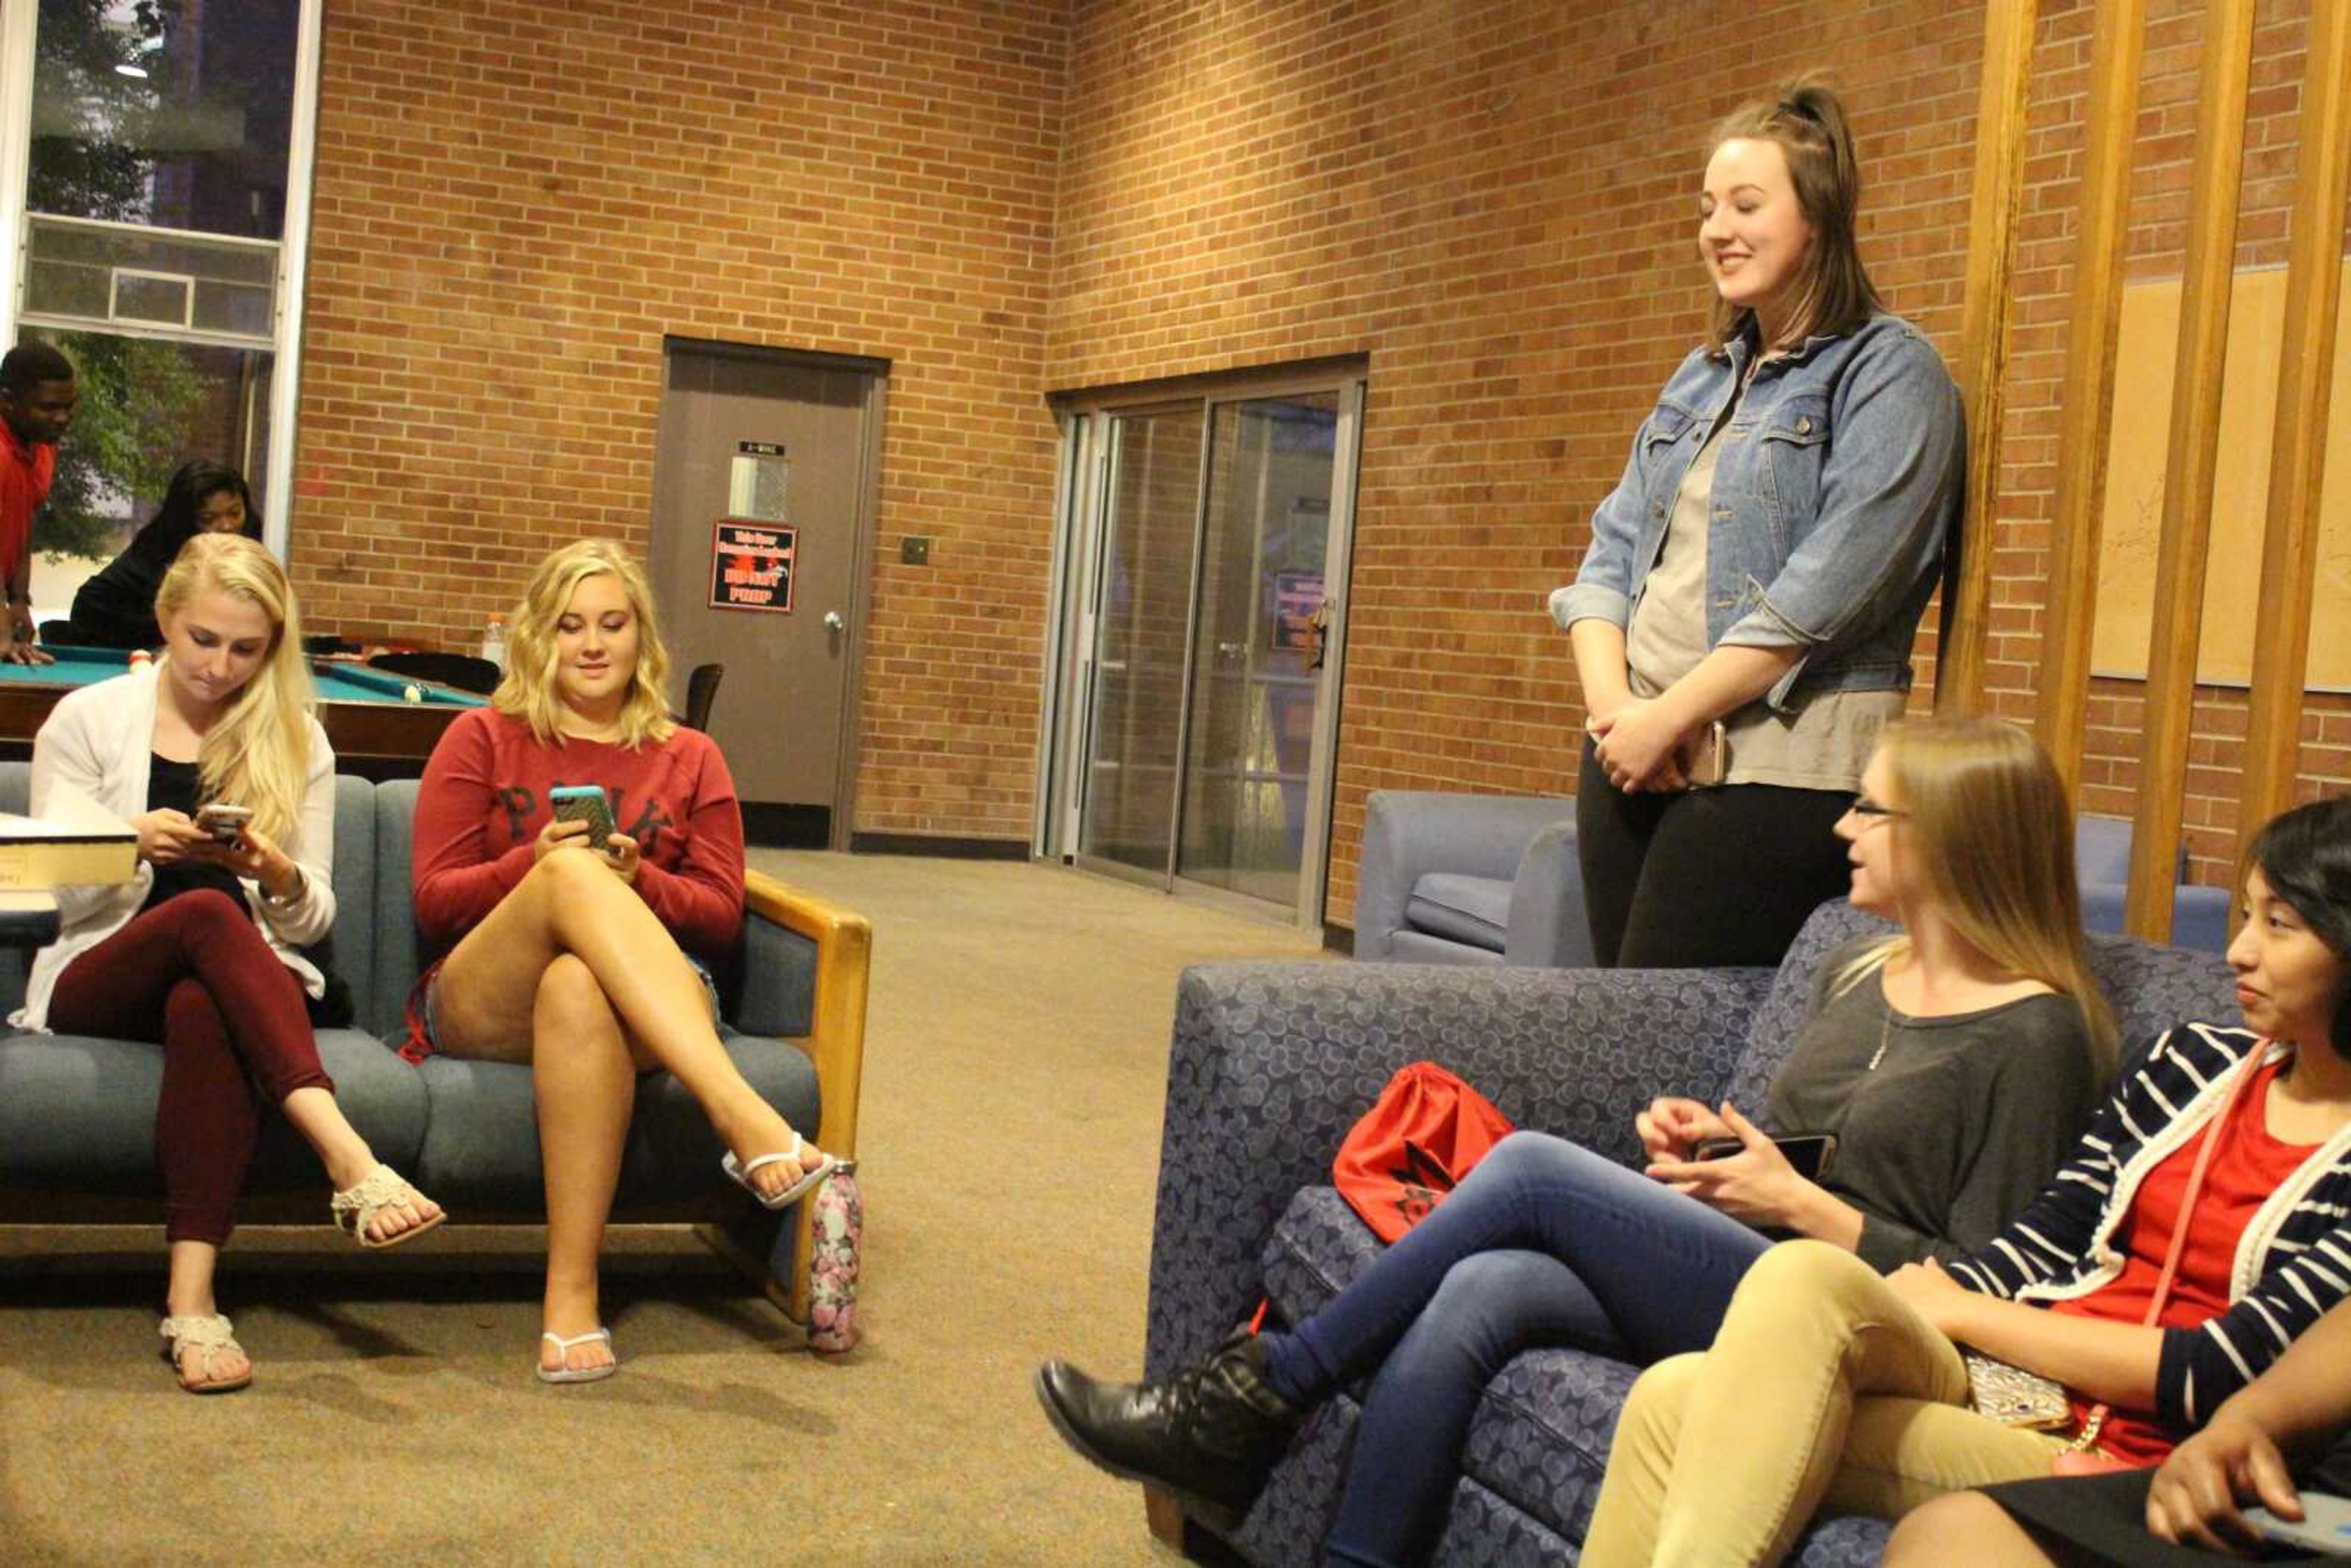 Beauty club vice president Lela Roach speaks to new members of the club at the first meeting on on Aug. 7 held in the lobby of Dearmont Hall.